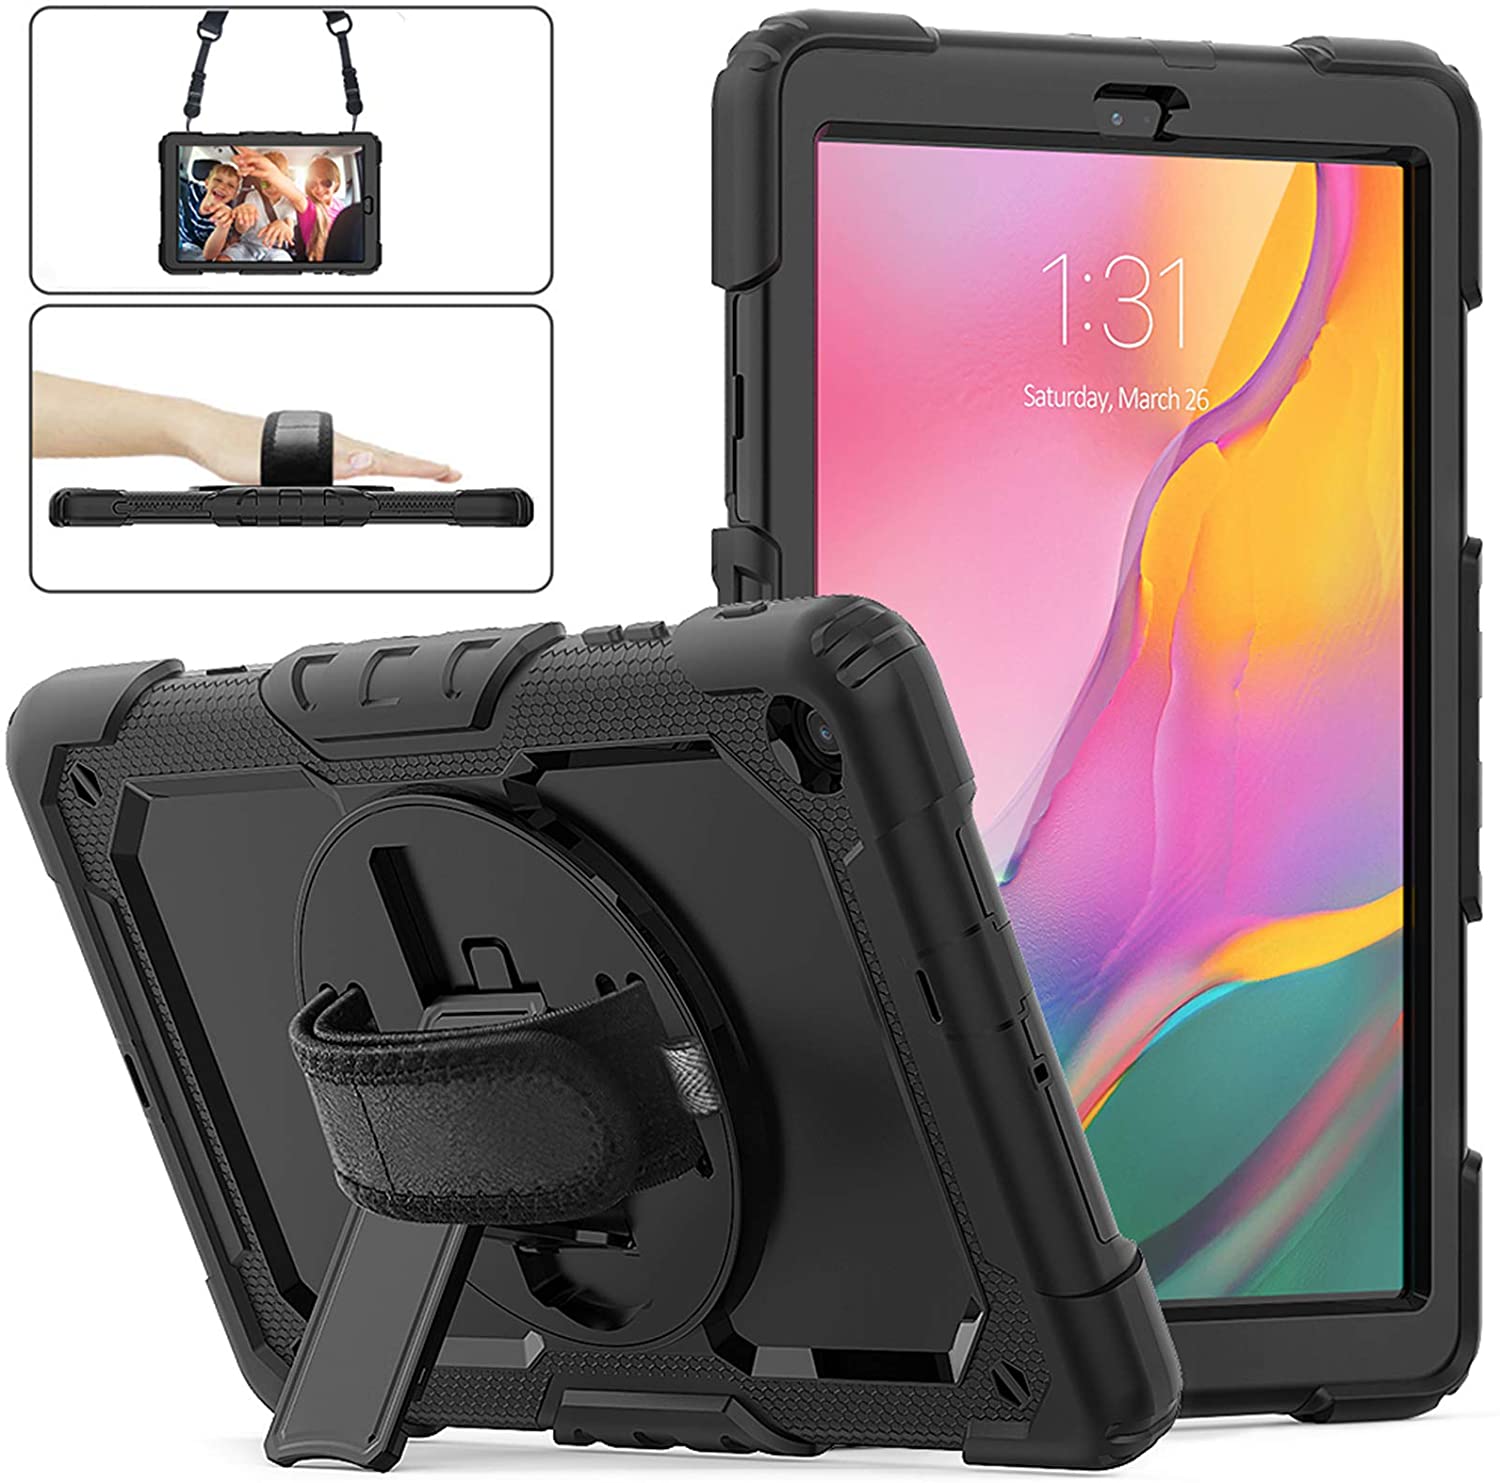 Samsung Galaxy Tab A 10.1 Case 2019, Herize SM-T510/T515 Shockproof Rugged Protective Case Cover with Built-in Screen Protector. - e4cents